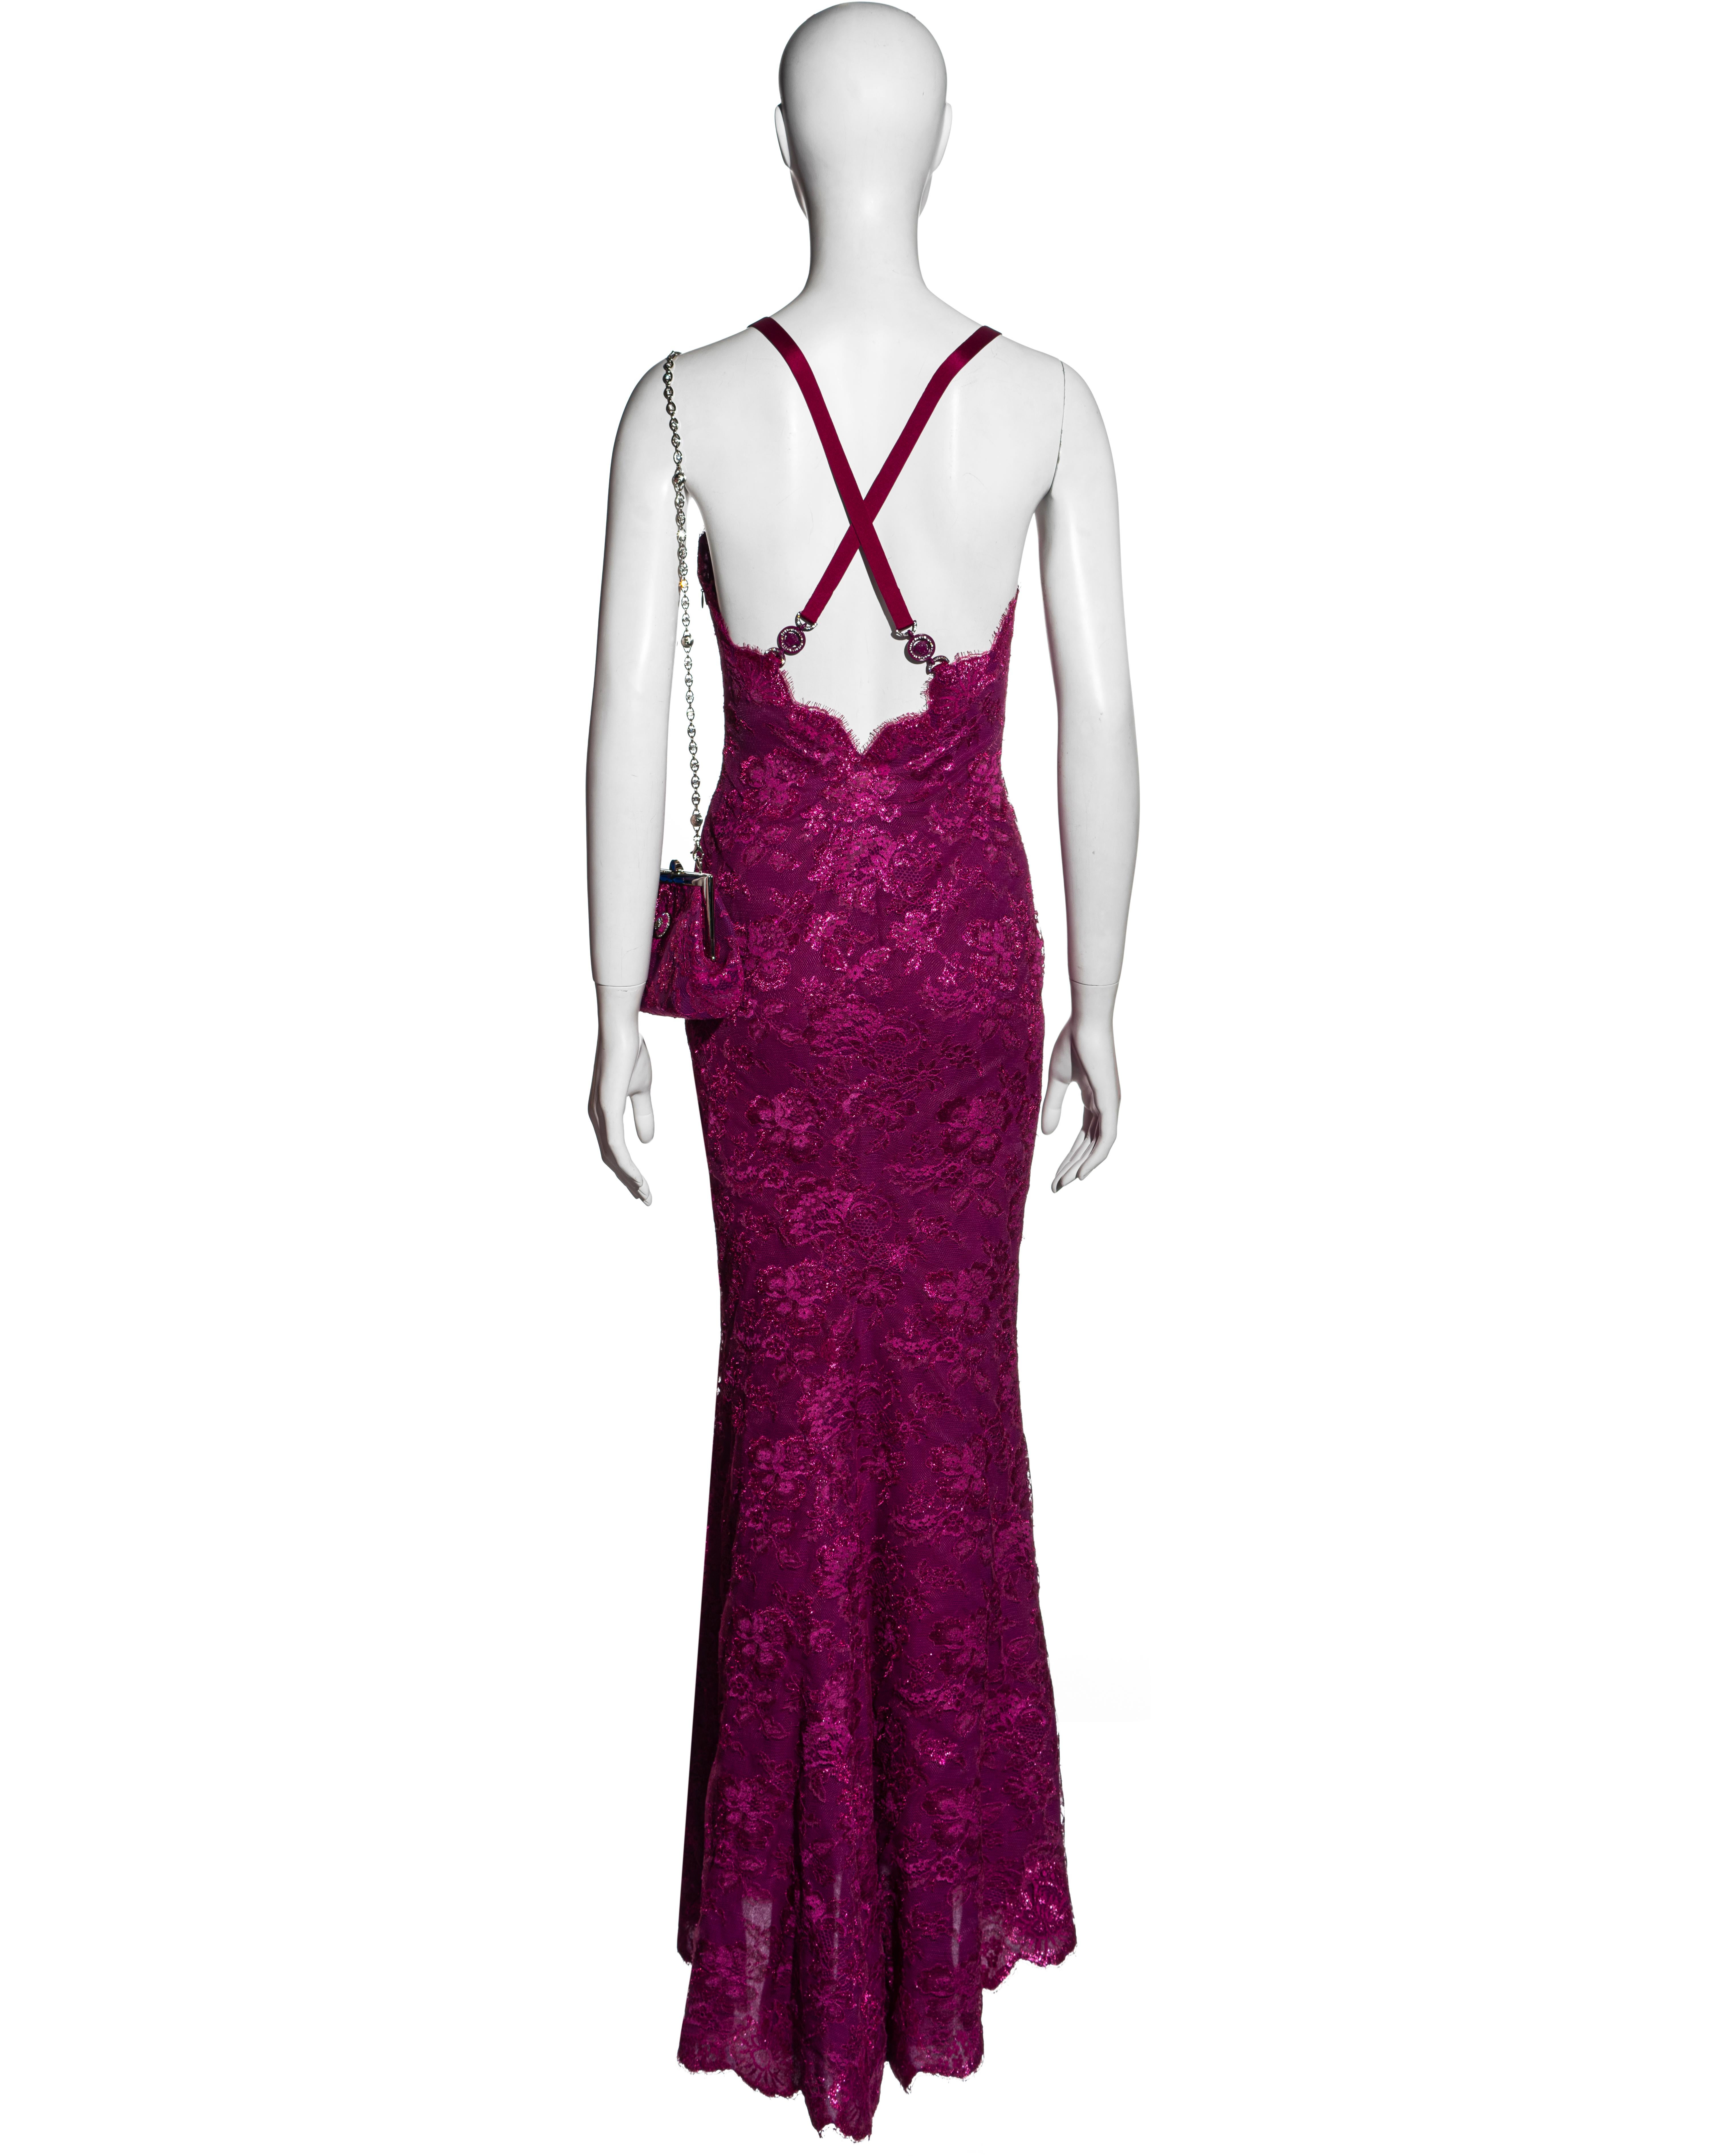 Pink Atelier Versace Haute Couture magenta pink lace evening dress and purse, ss 1996